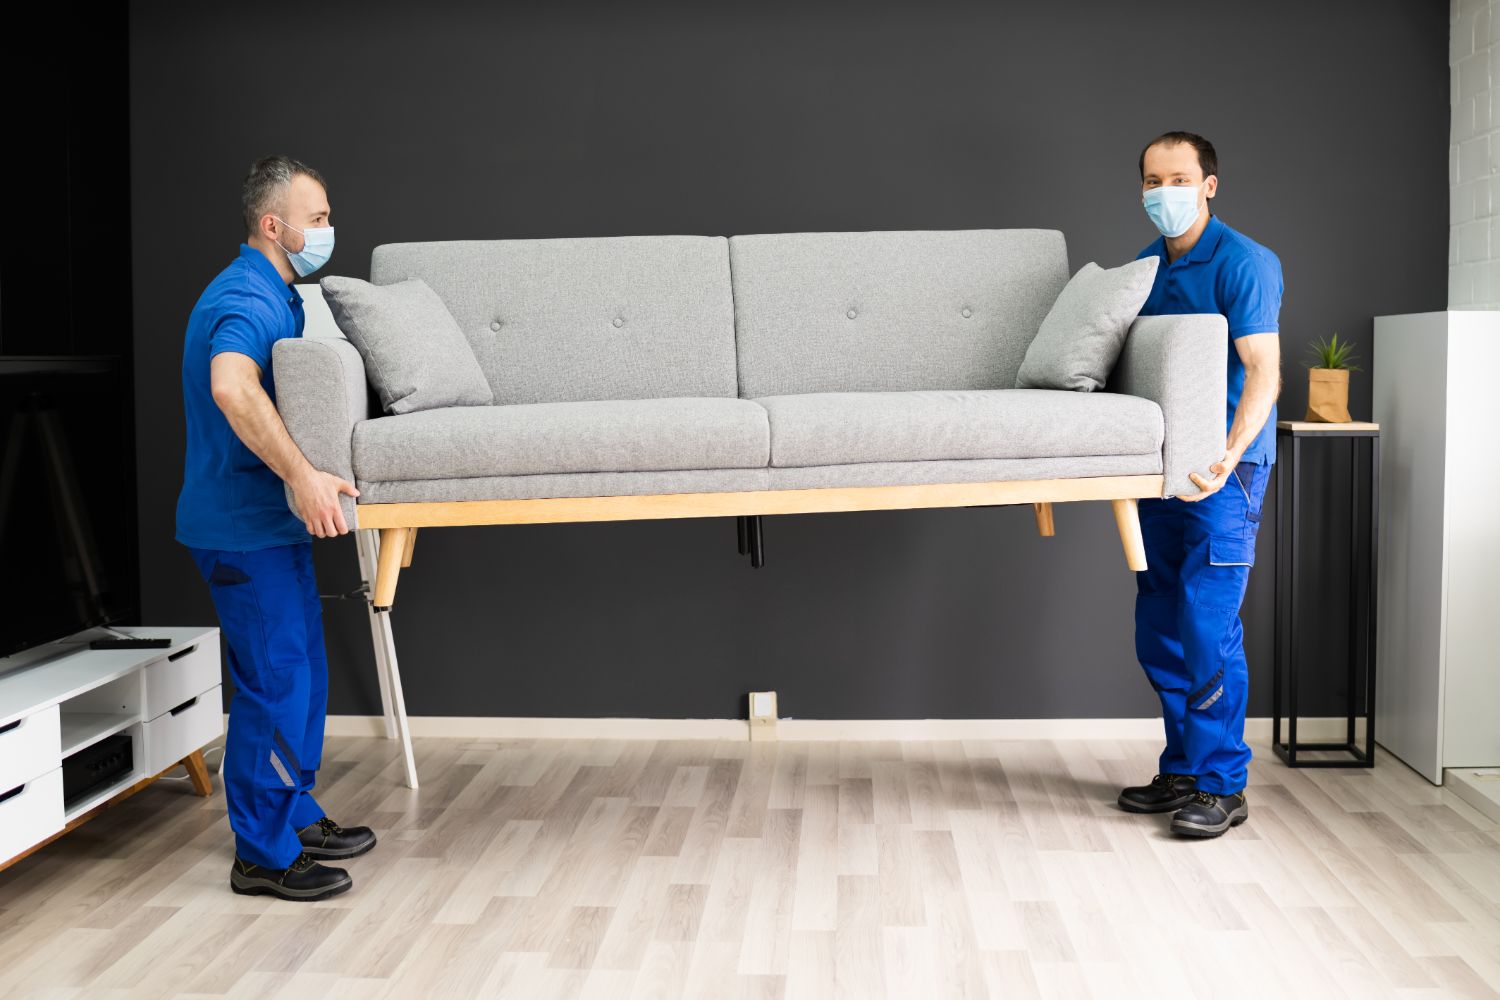 COVID safe movers wearing masks lifting a couch